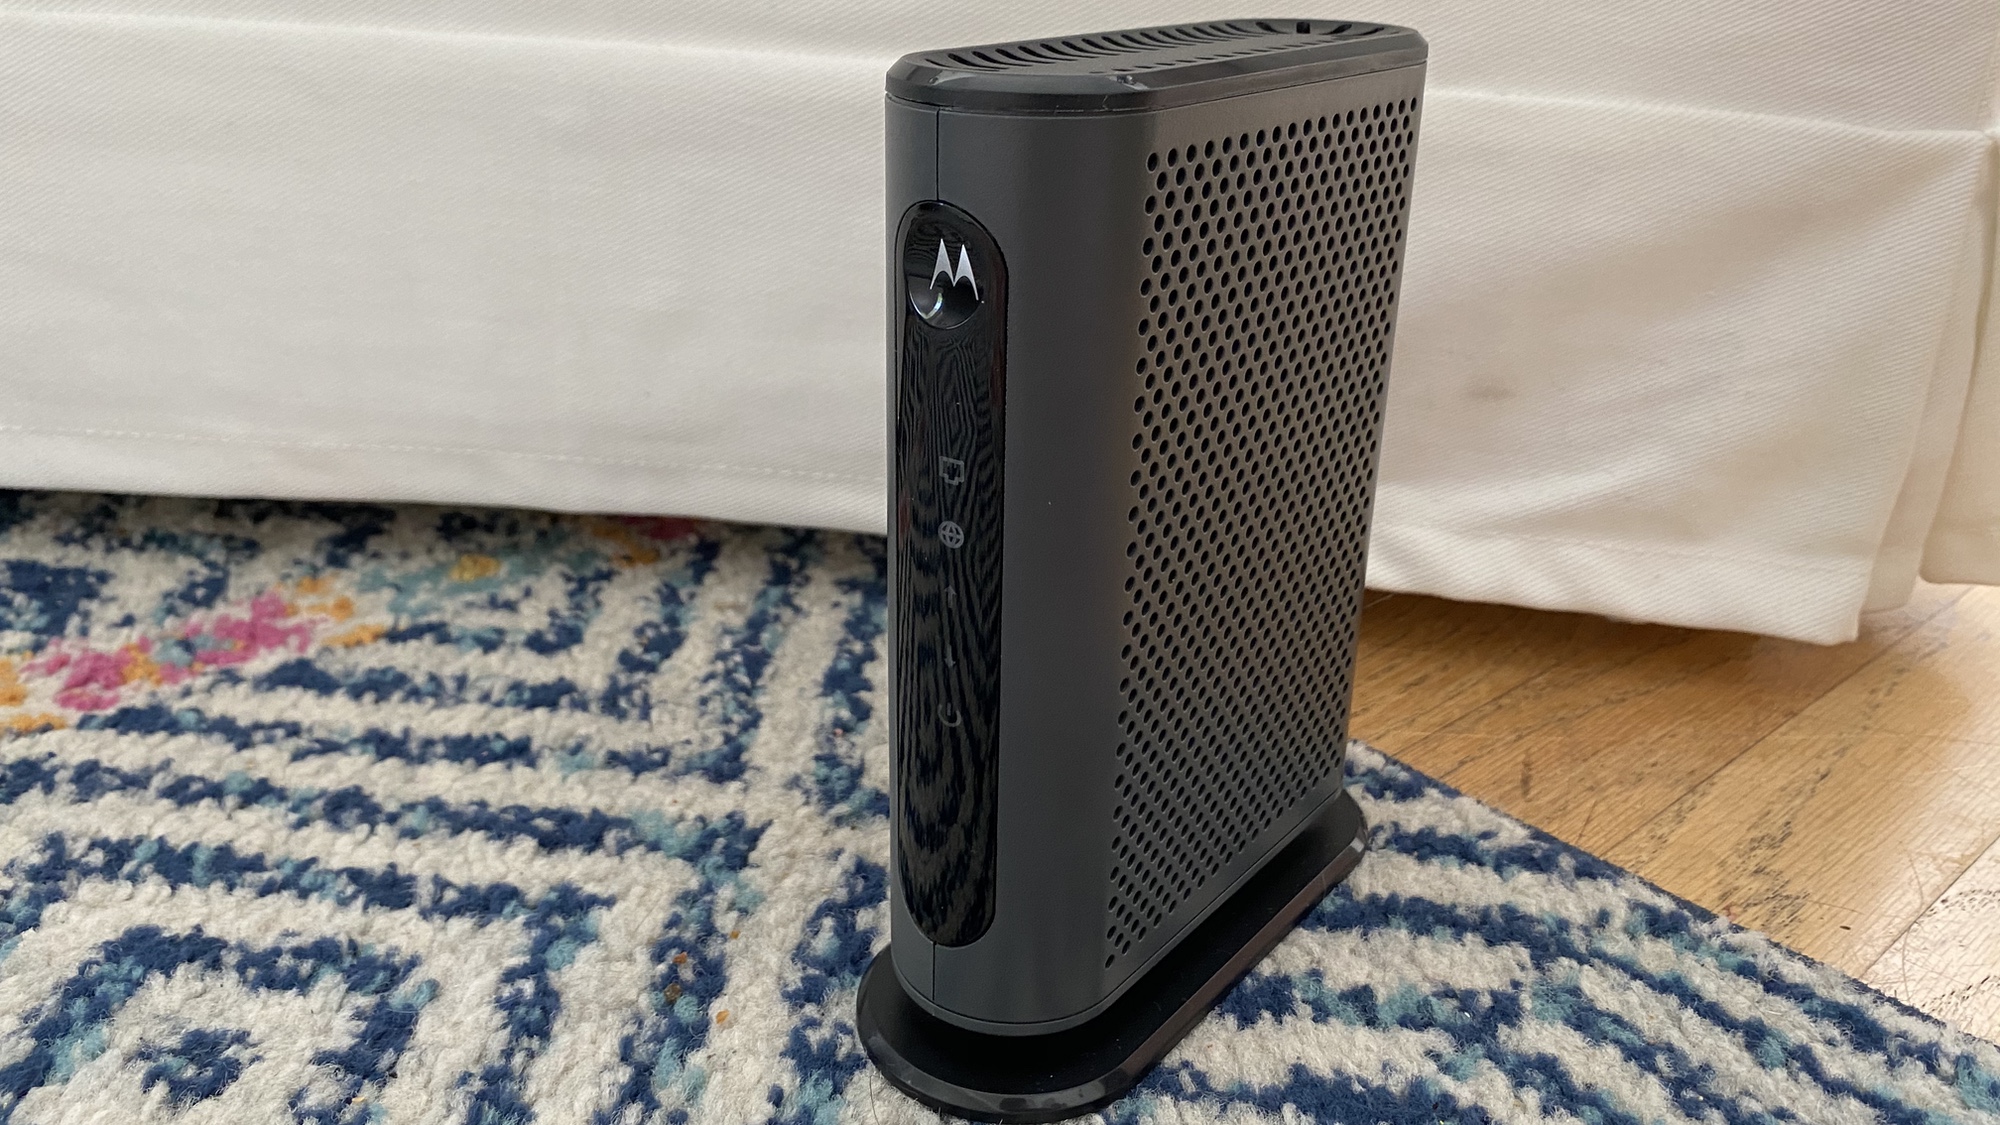 A Motorola modem, representing the easy way to change your IP address